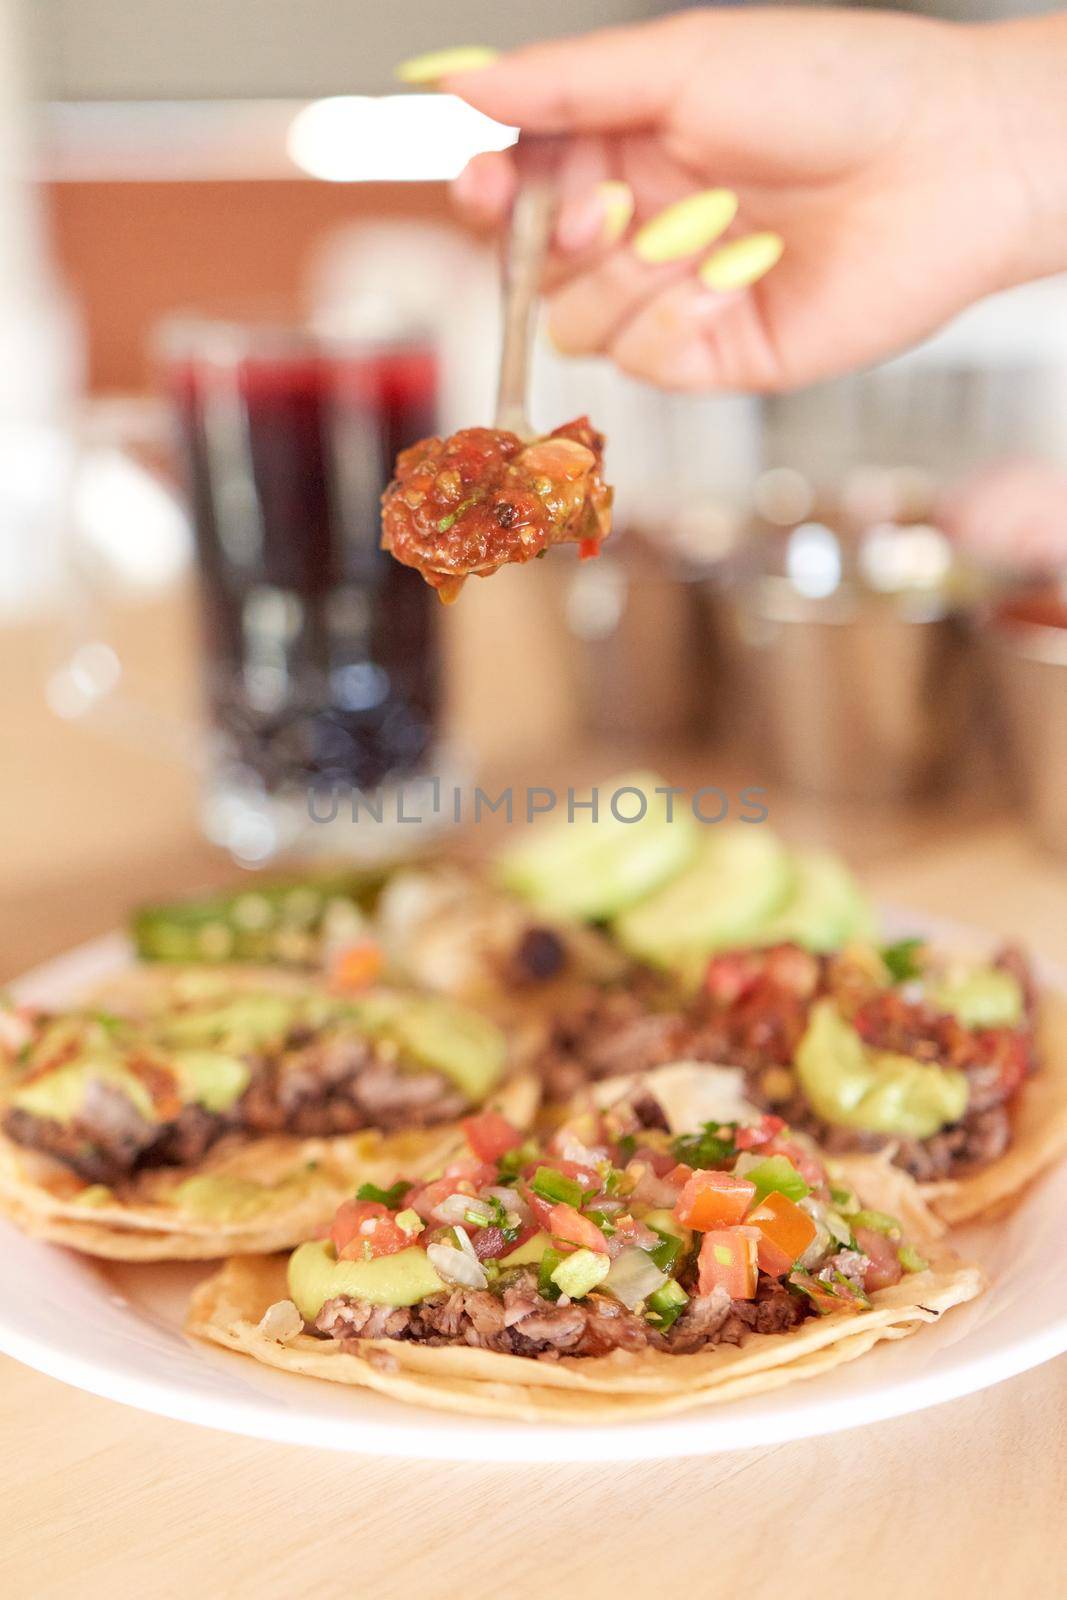 Girl adding salsa to her delicious tacos by JpRamos